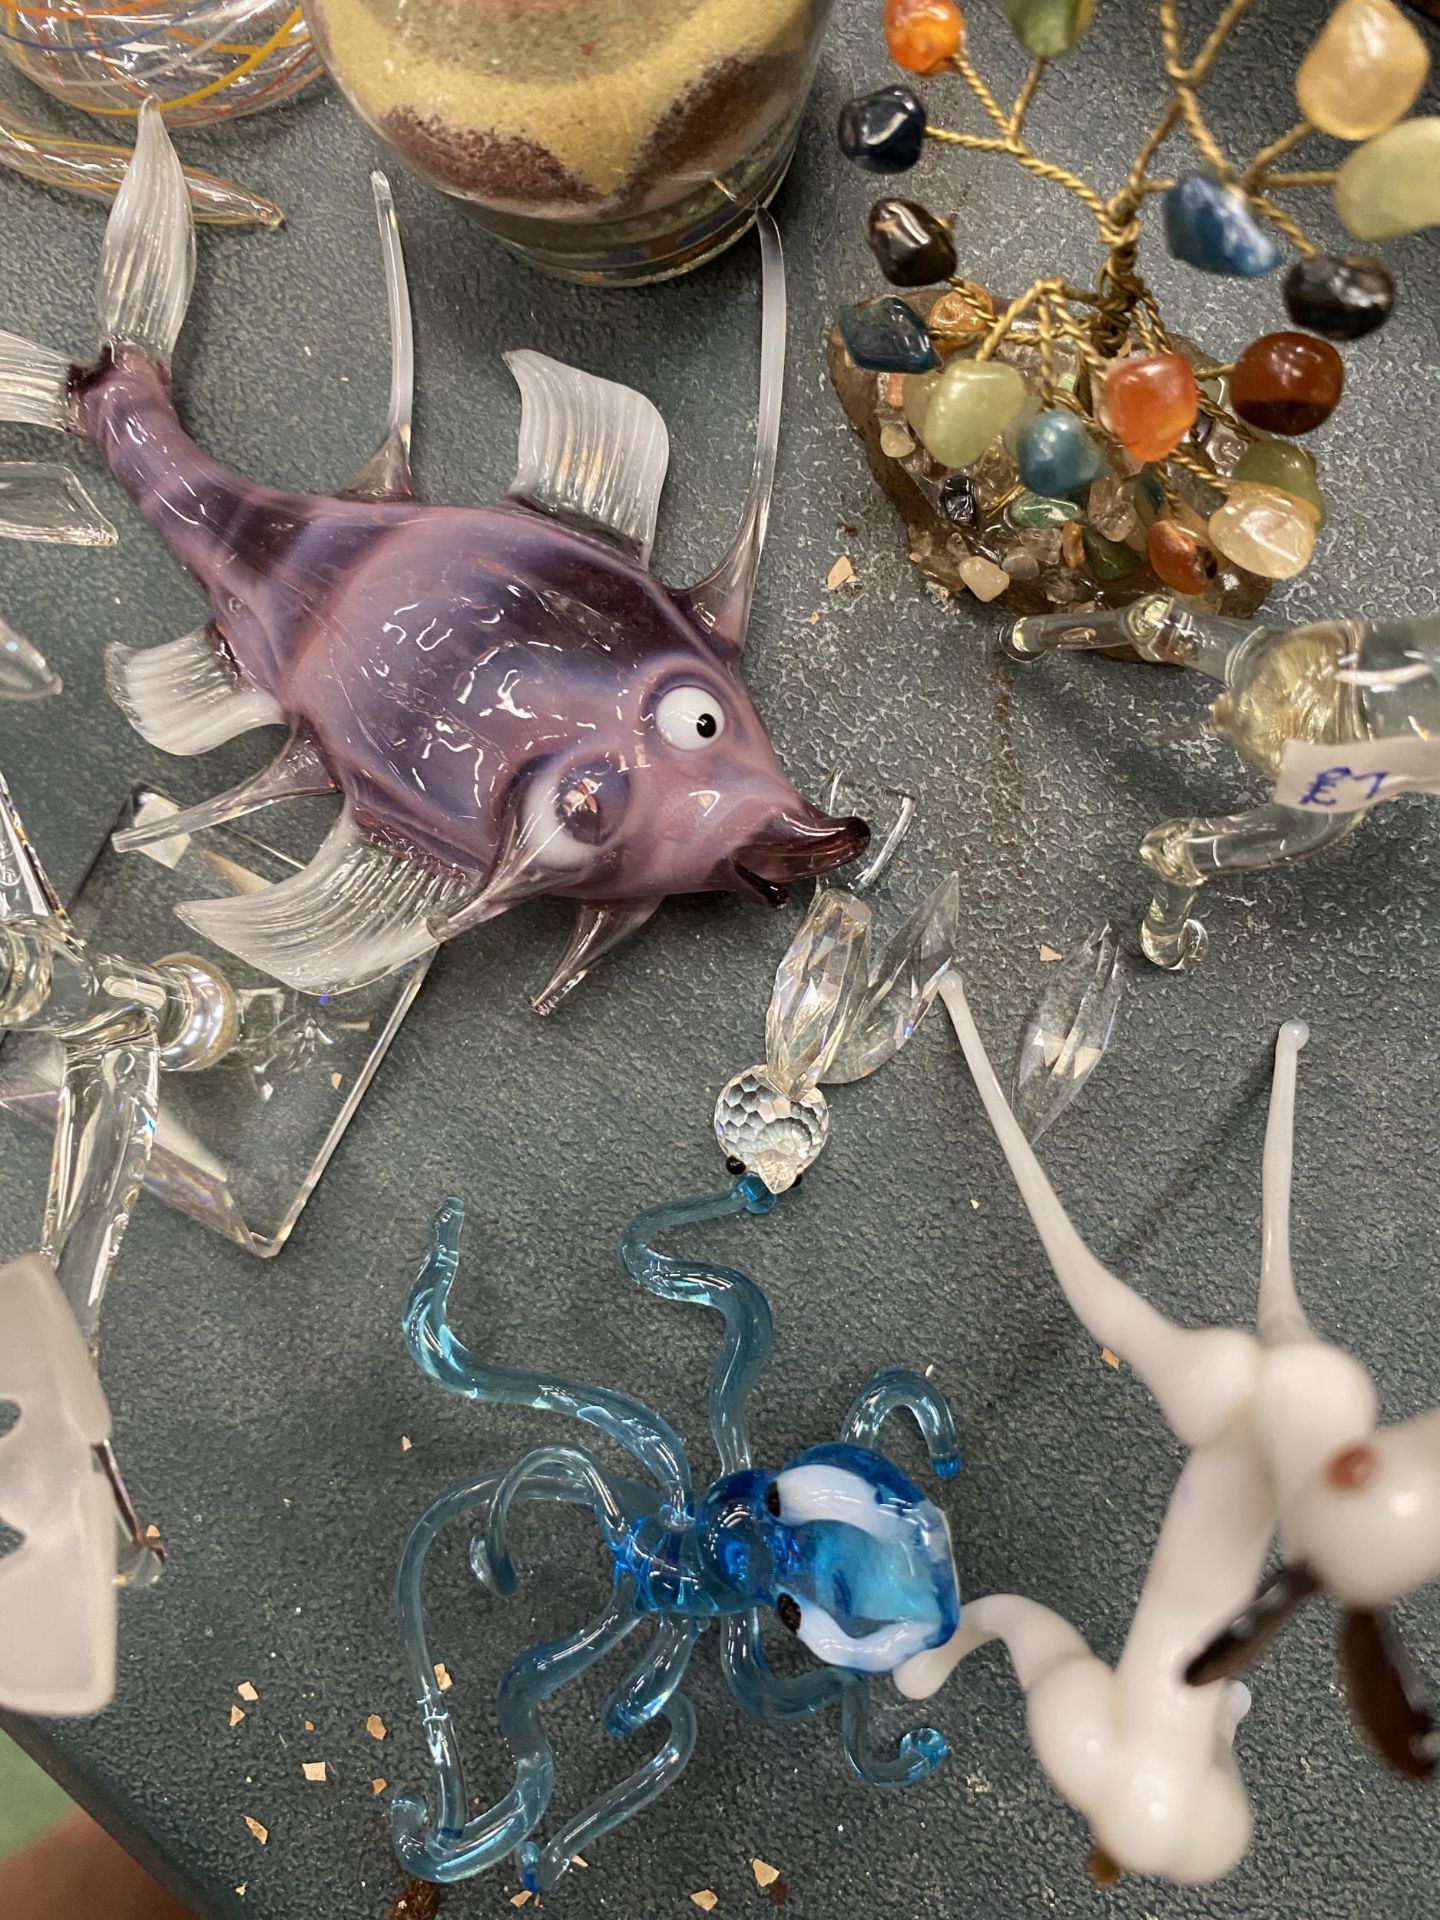 A GROUP OF GLASSWARE ANIMALS, BLUE OCTOPUS ETC - Image 2 of 3